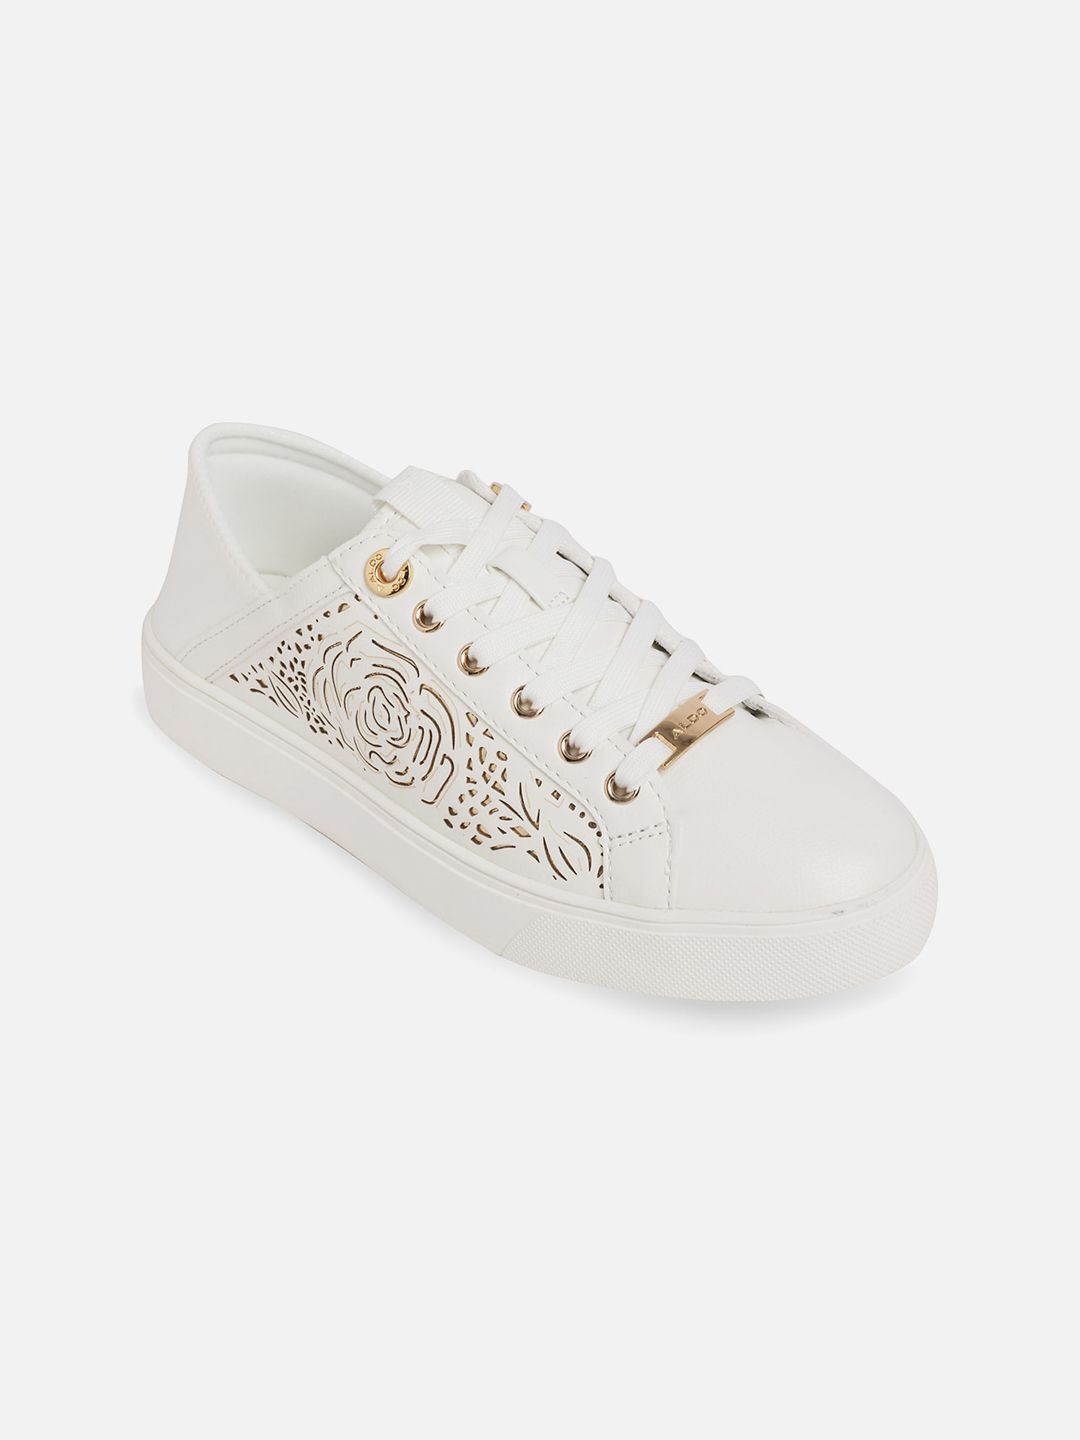 ALDO Women White Printed Lace Up Sneakers Price in India